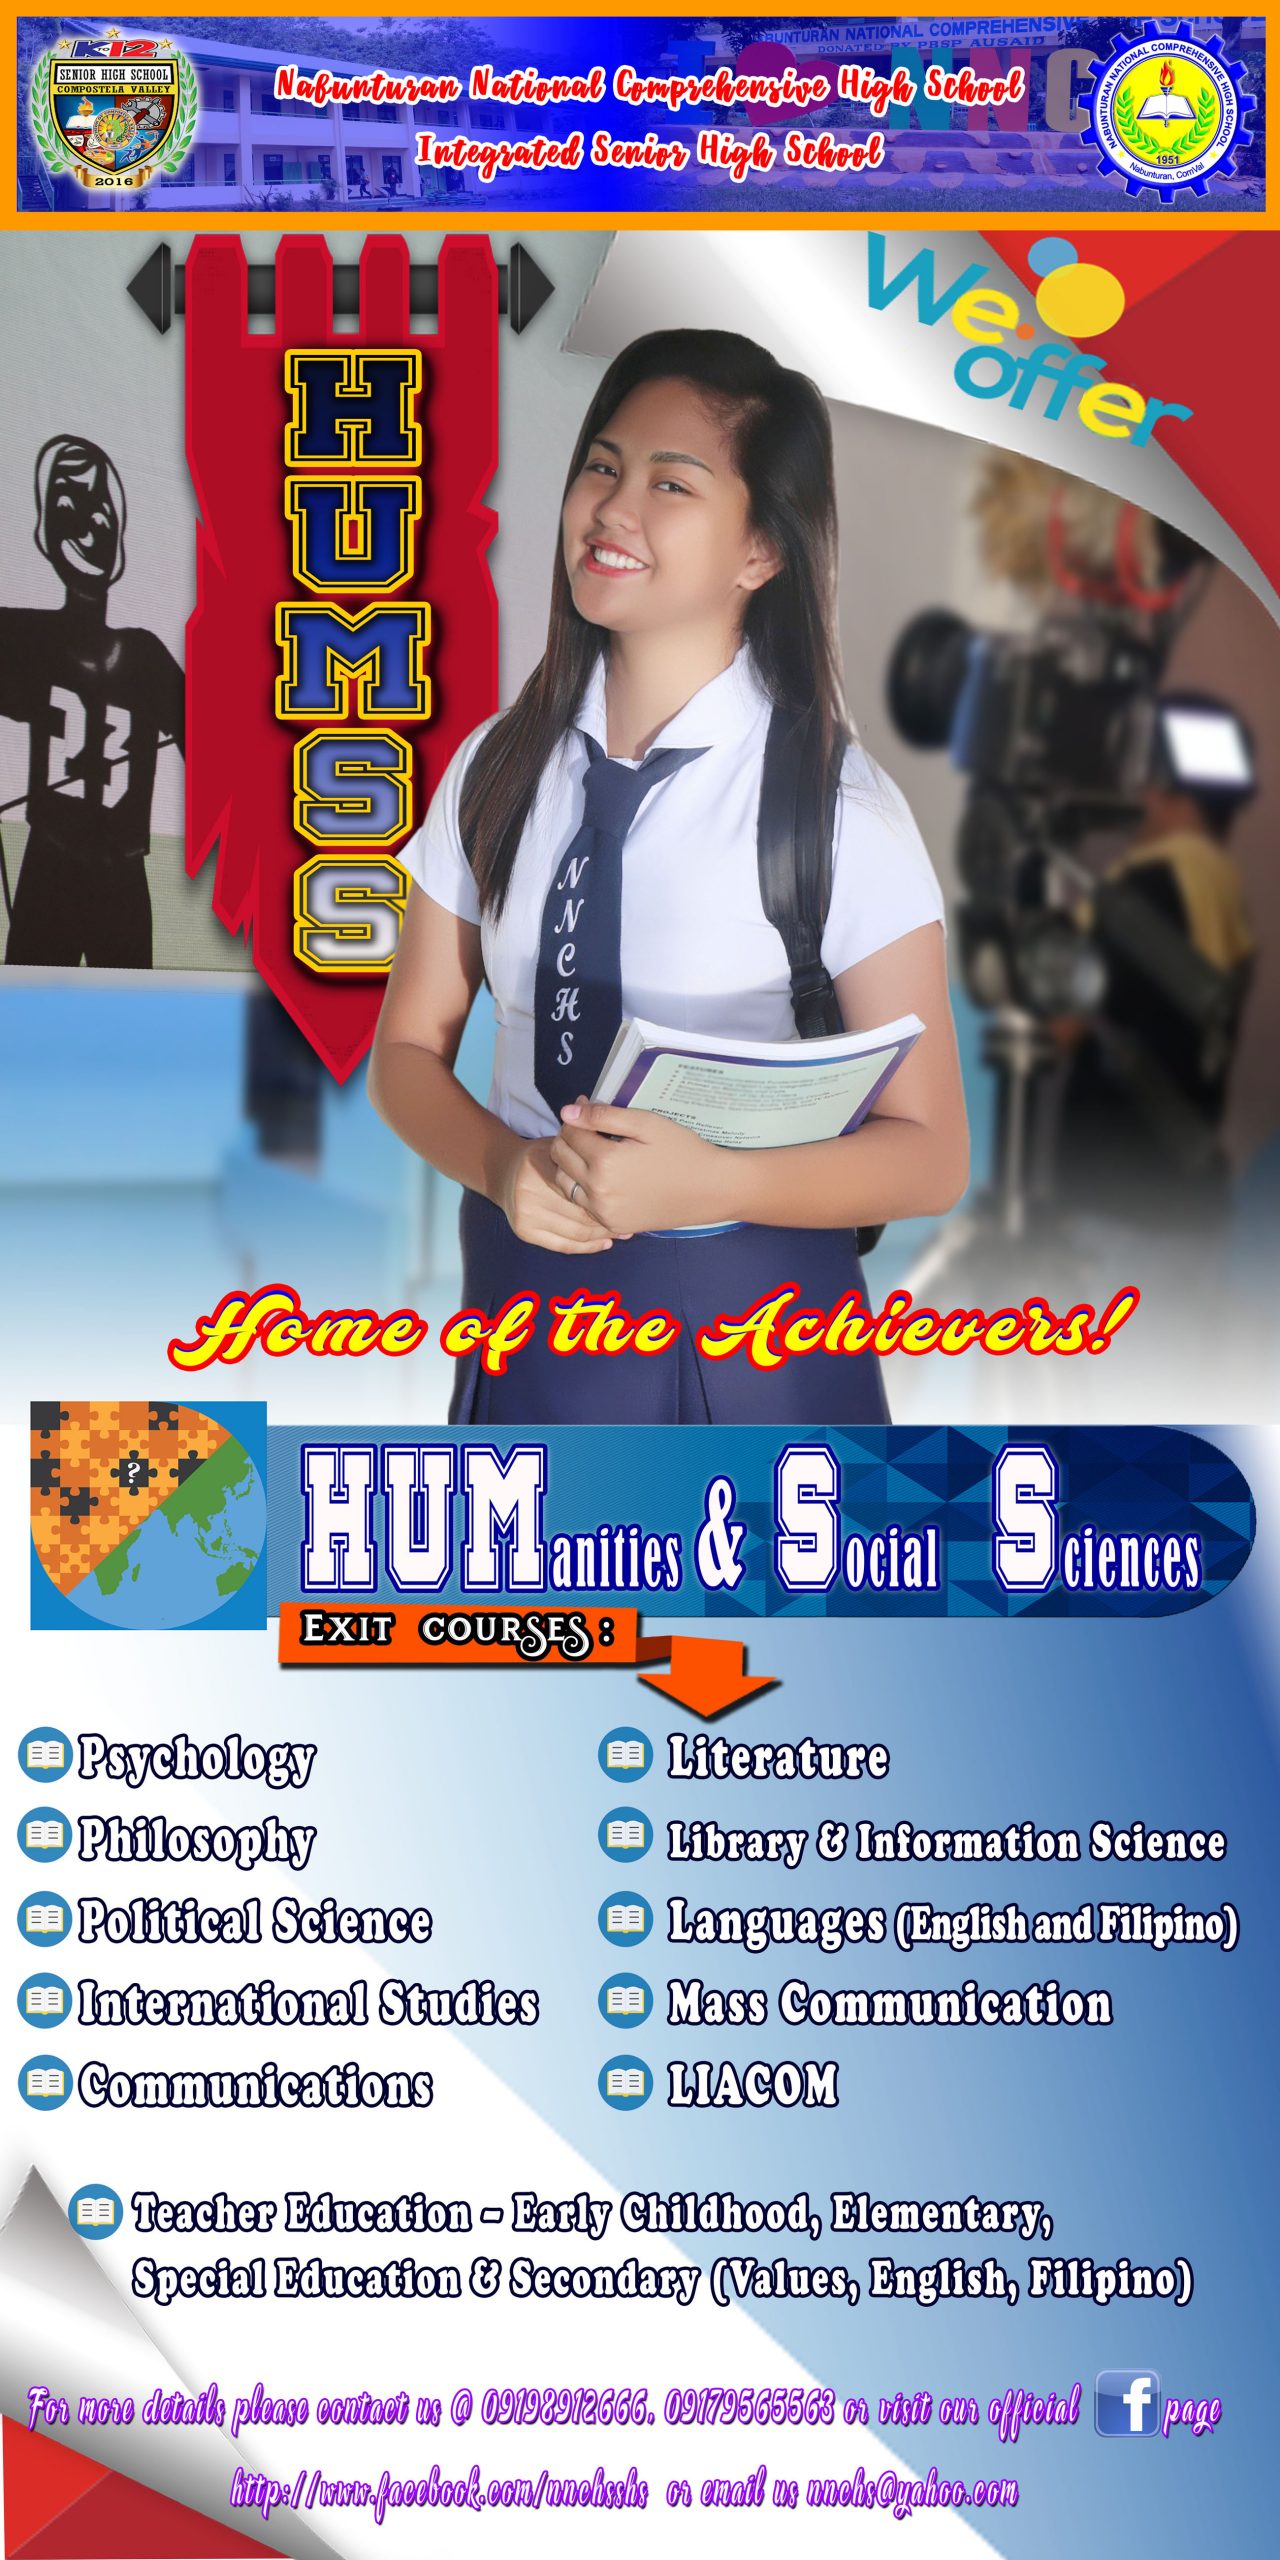 humss courses tourism